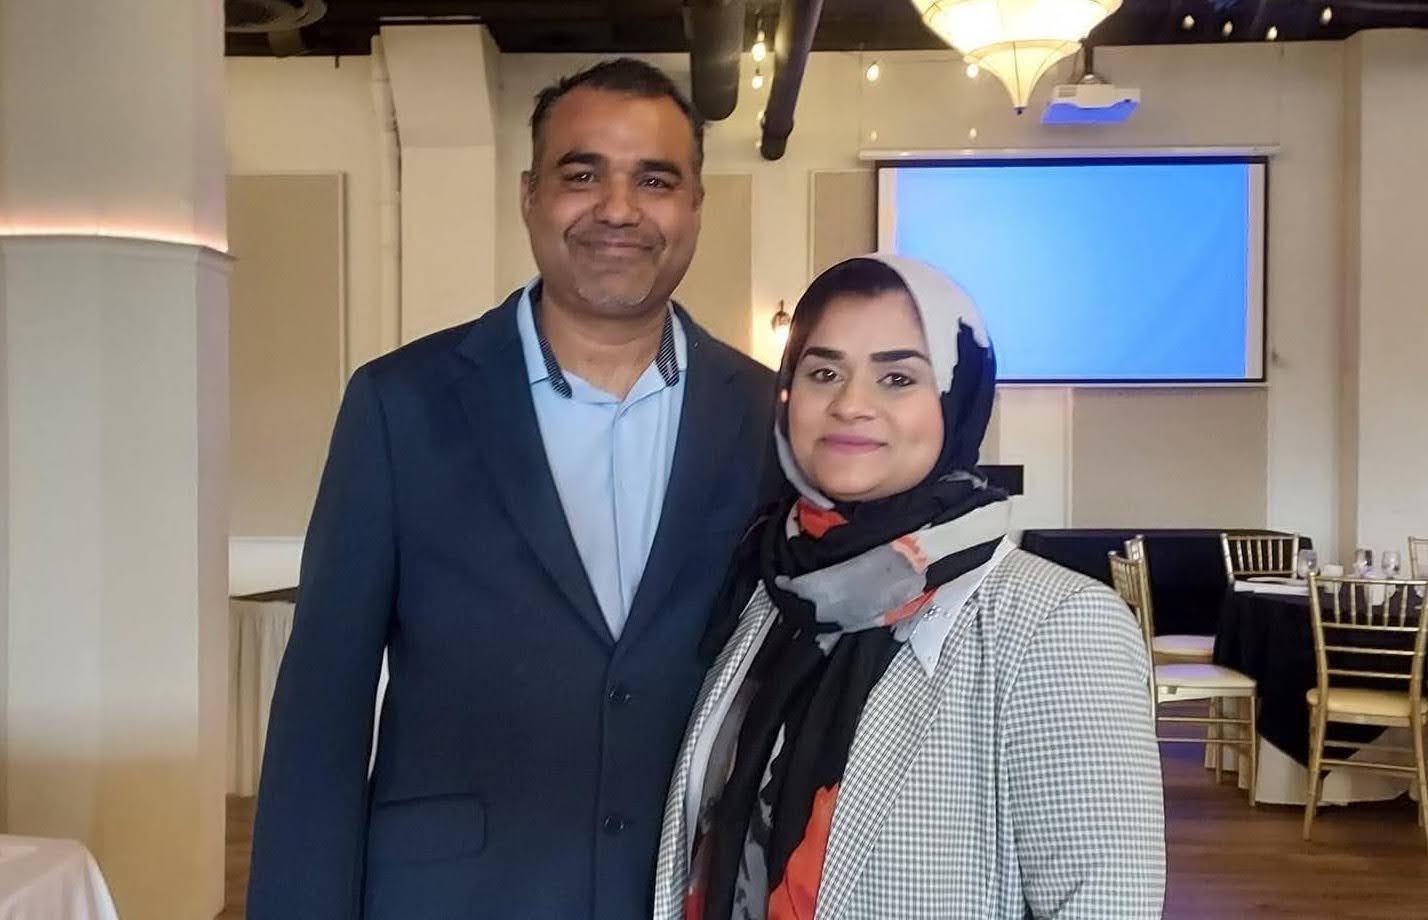 Anas Mangla and his wife, Nasreen Akhtar, owners of Aero Transportation, Naz716 Business & Cultural Center and the newly inaugurated business Bridge Niagara. (Submitted photo)